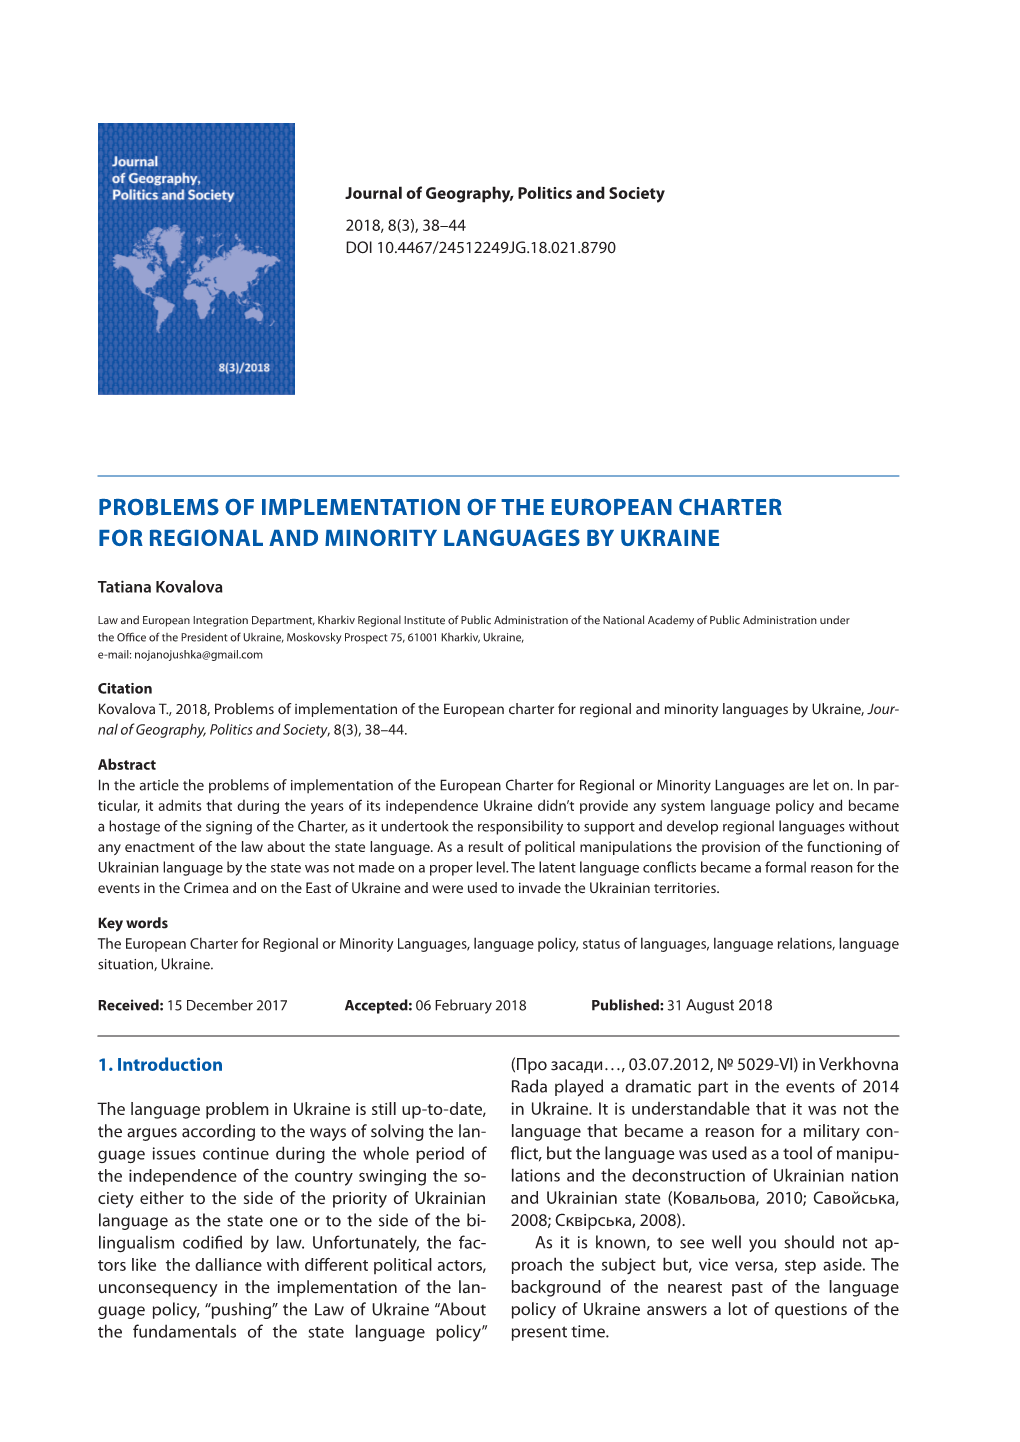 Problems of Implementation of the European Charter for Regional and Minority Languages by Ukraine